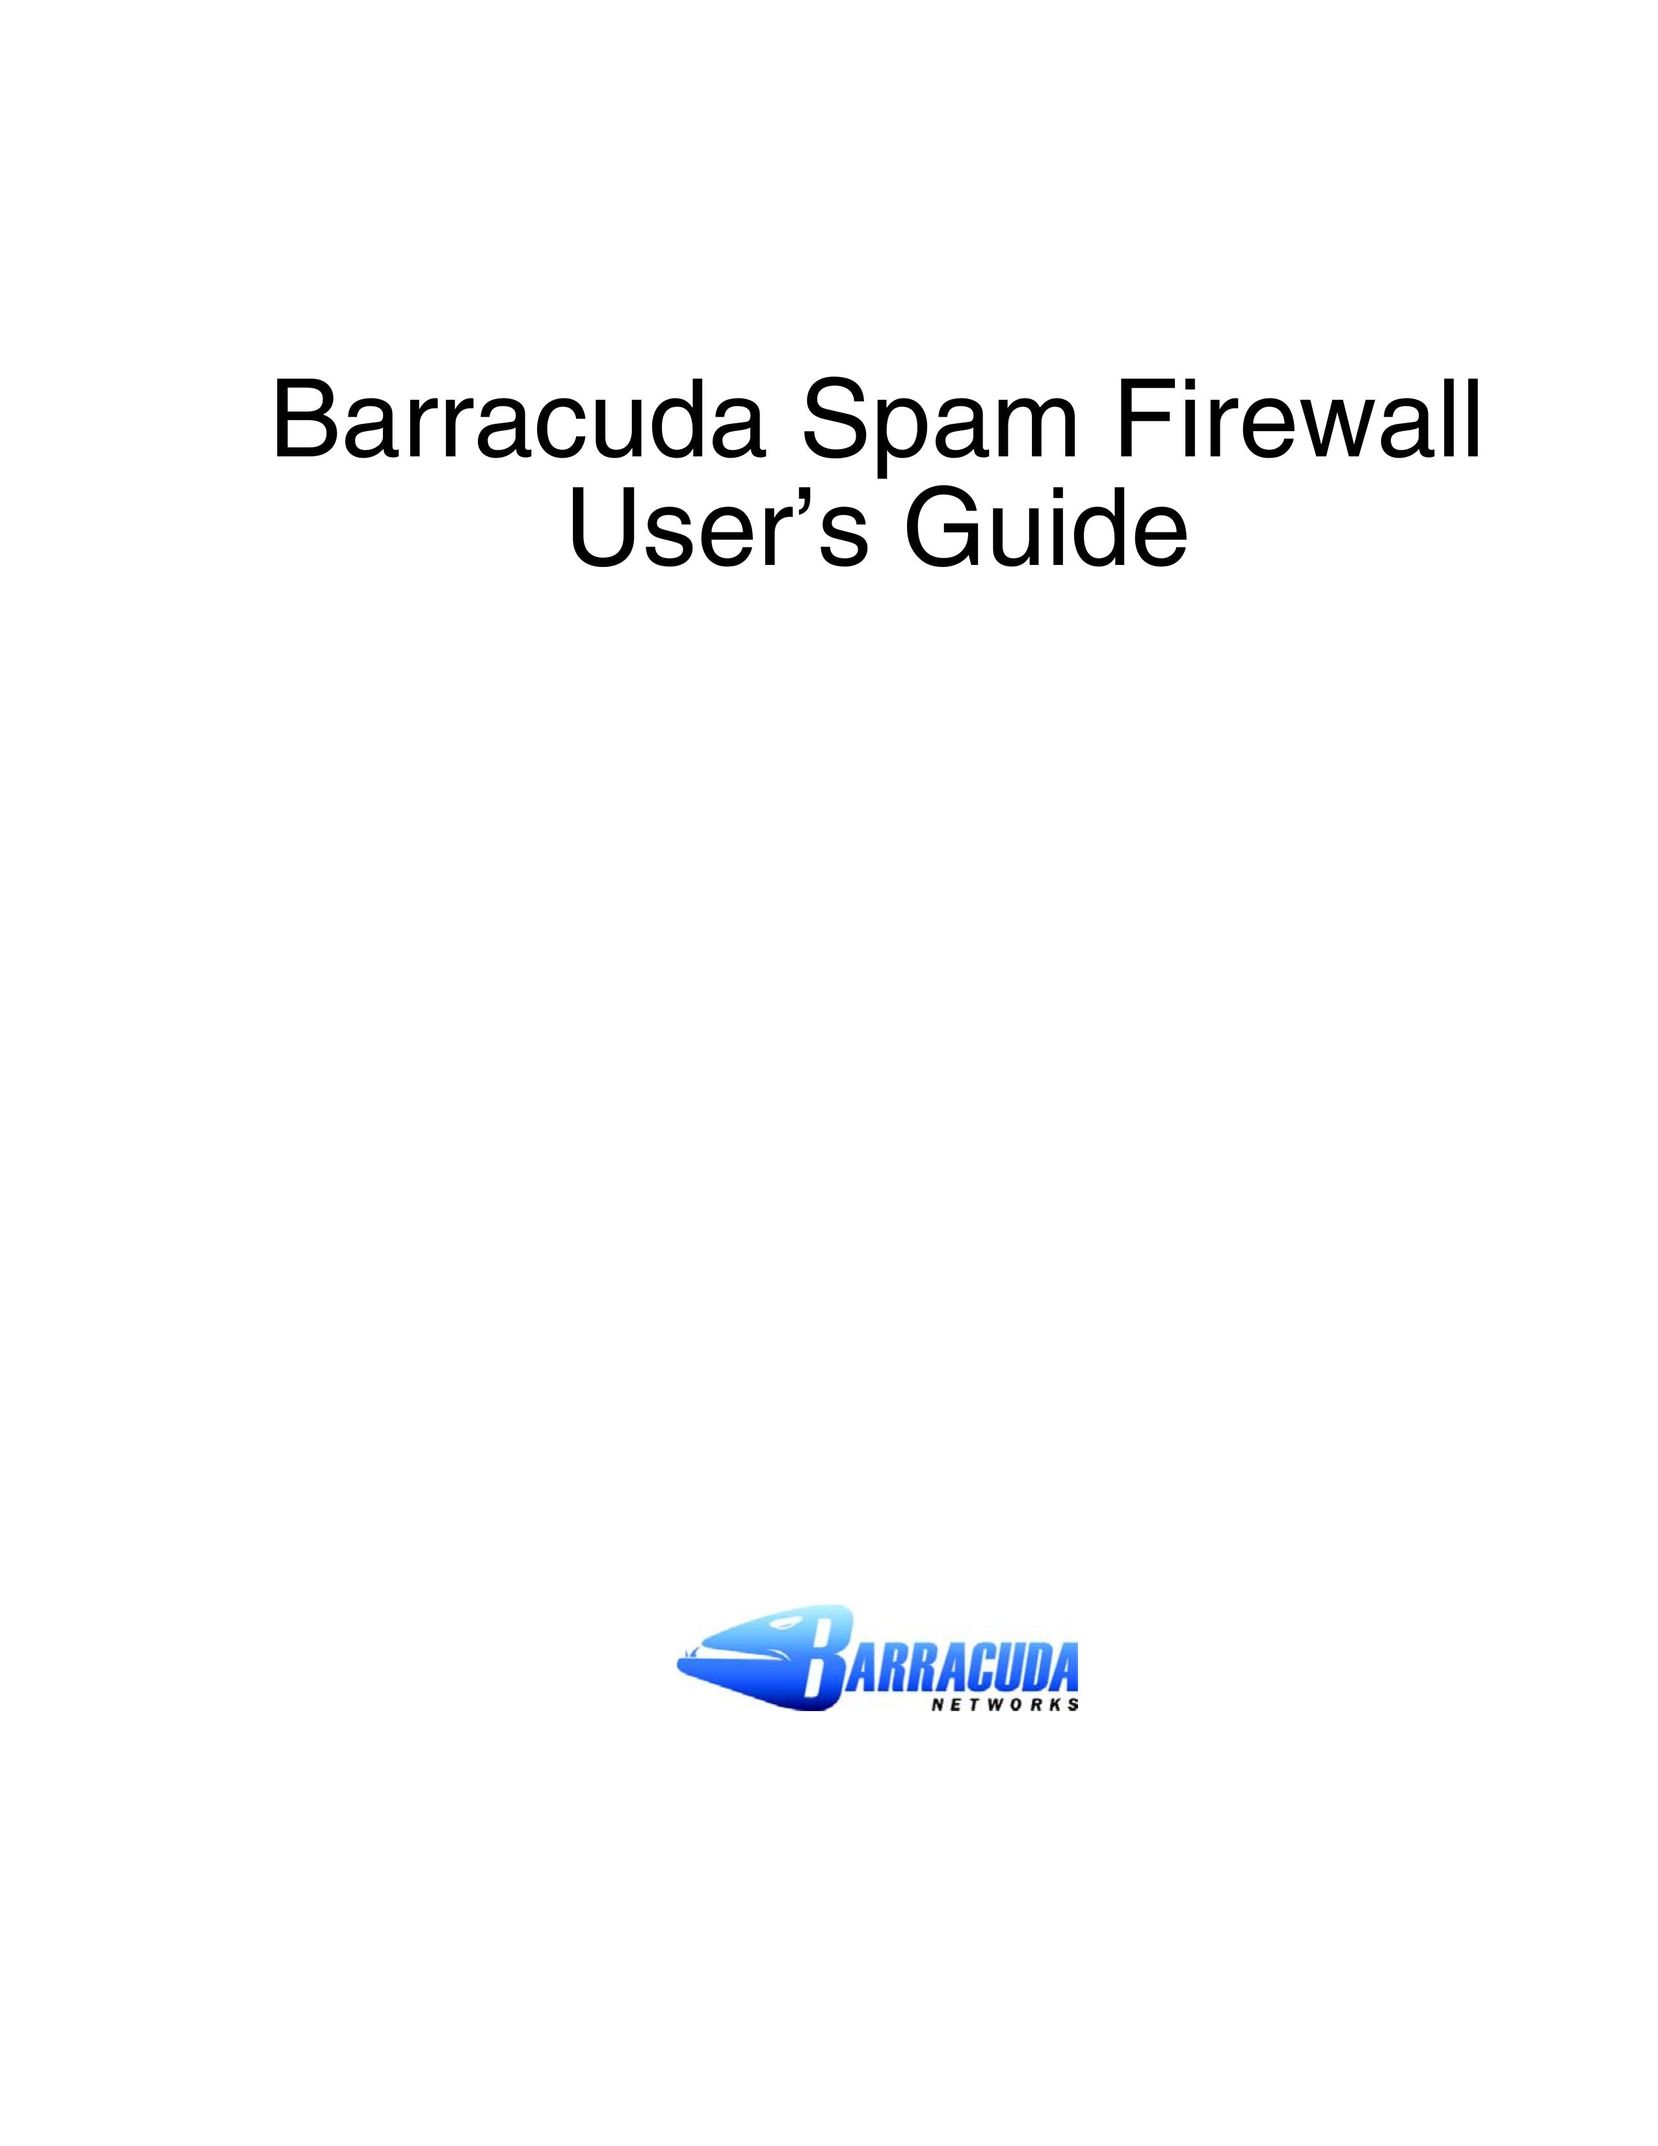 Barracuda Networks Spam Firewall Network Router User Manual